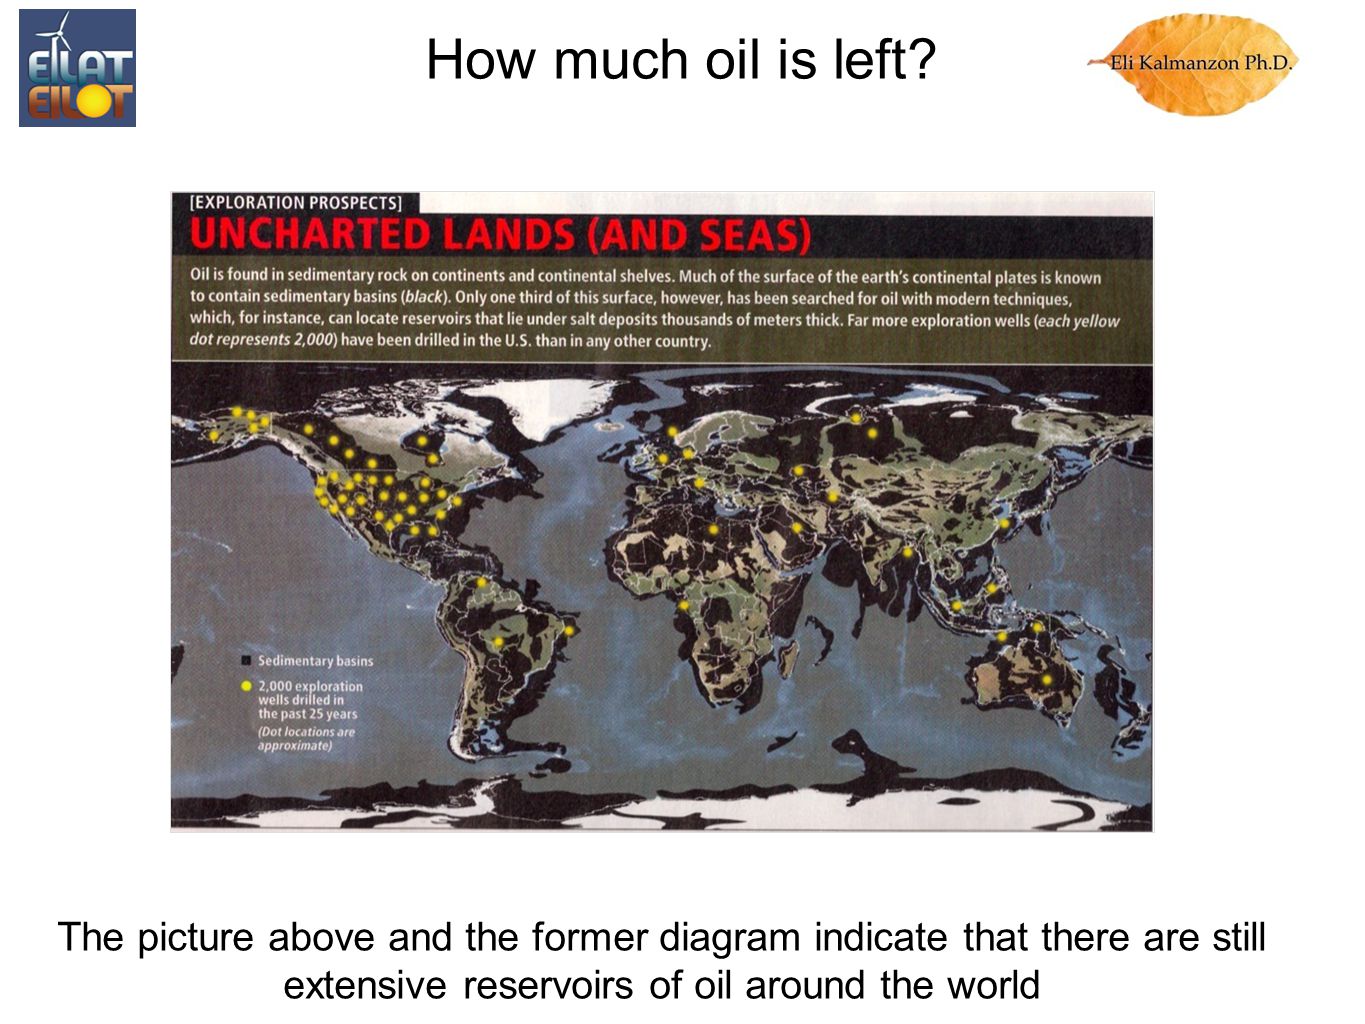 The picture above and the former diagram indicate that there are still extensive reservoirs of oil around the world